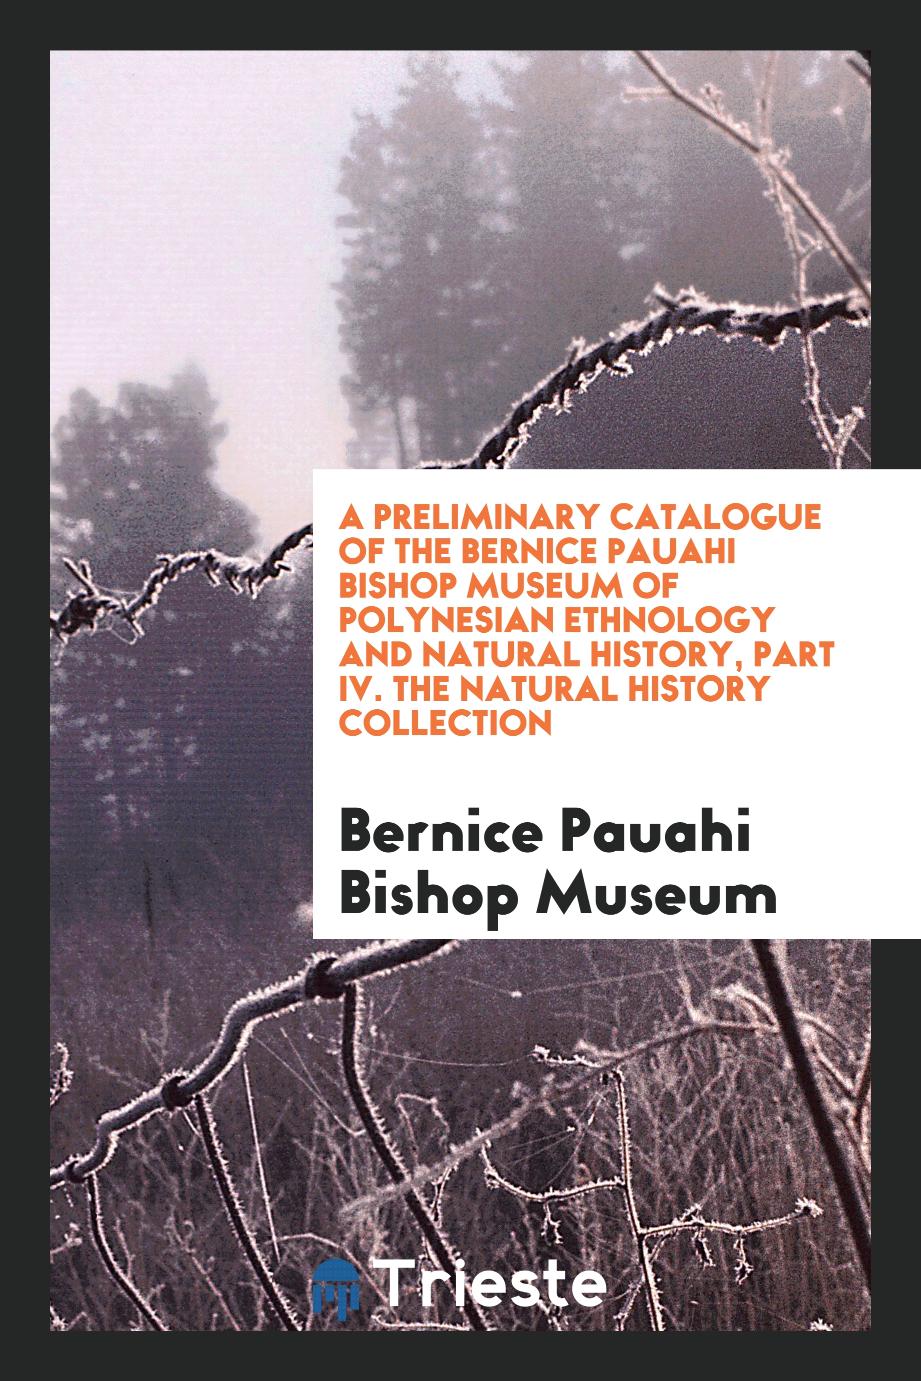 A Preliminary Catalogue of the Bernice Pauahi Bishop Museum of Polynesian Ethnology and Natural history, part IV. The natural history collection